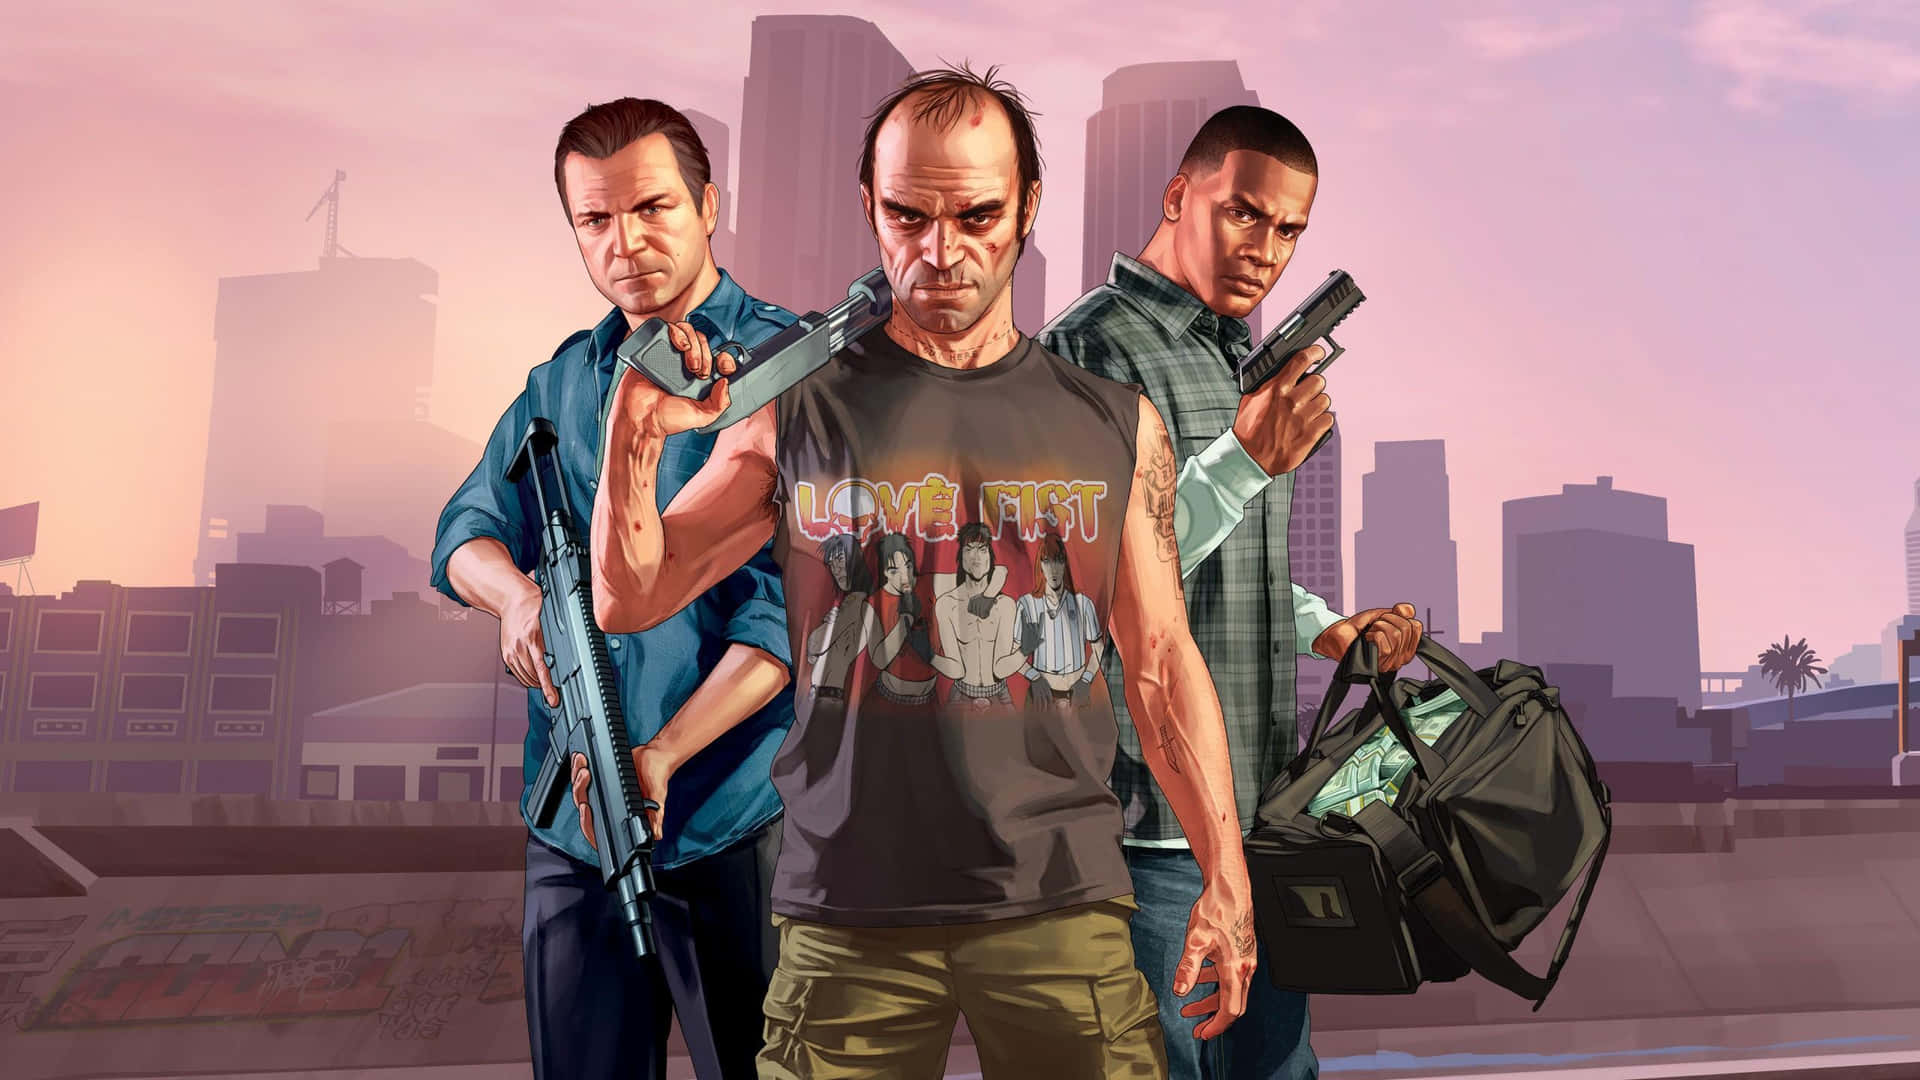 Enjoy the thriller of GTA 5 - A world of possibilities!